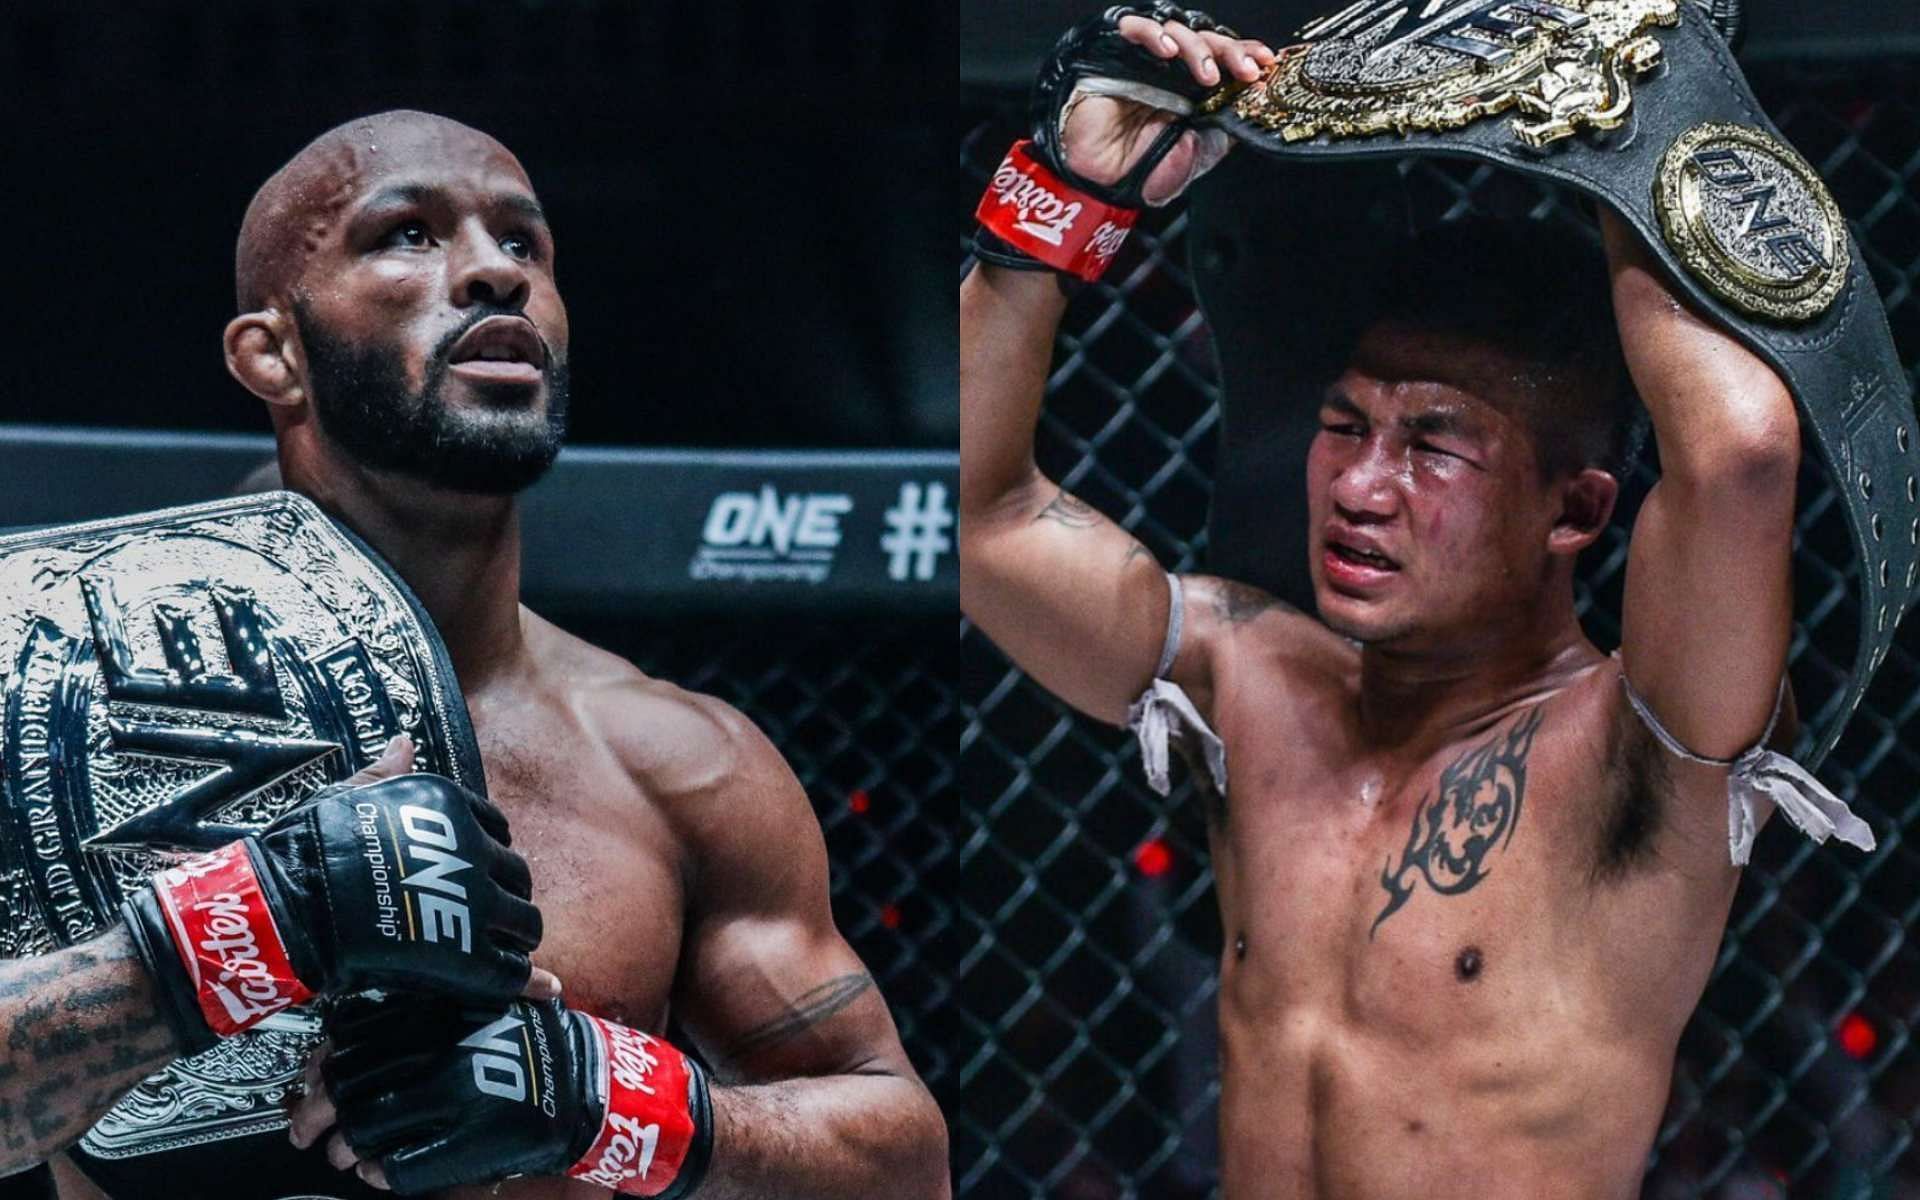 Rodtang Jitmuangnon (right) says he will use his fight against Demetrious Johnson (left) as a gauge if he&#039;s ready to jump to MMA. [Photos ONE Championship]